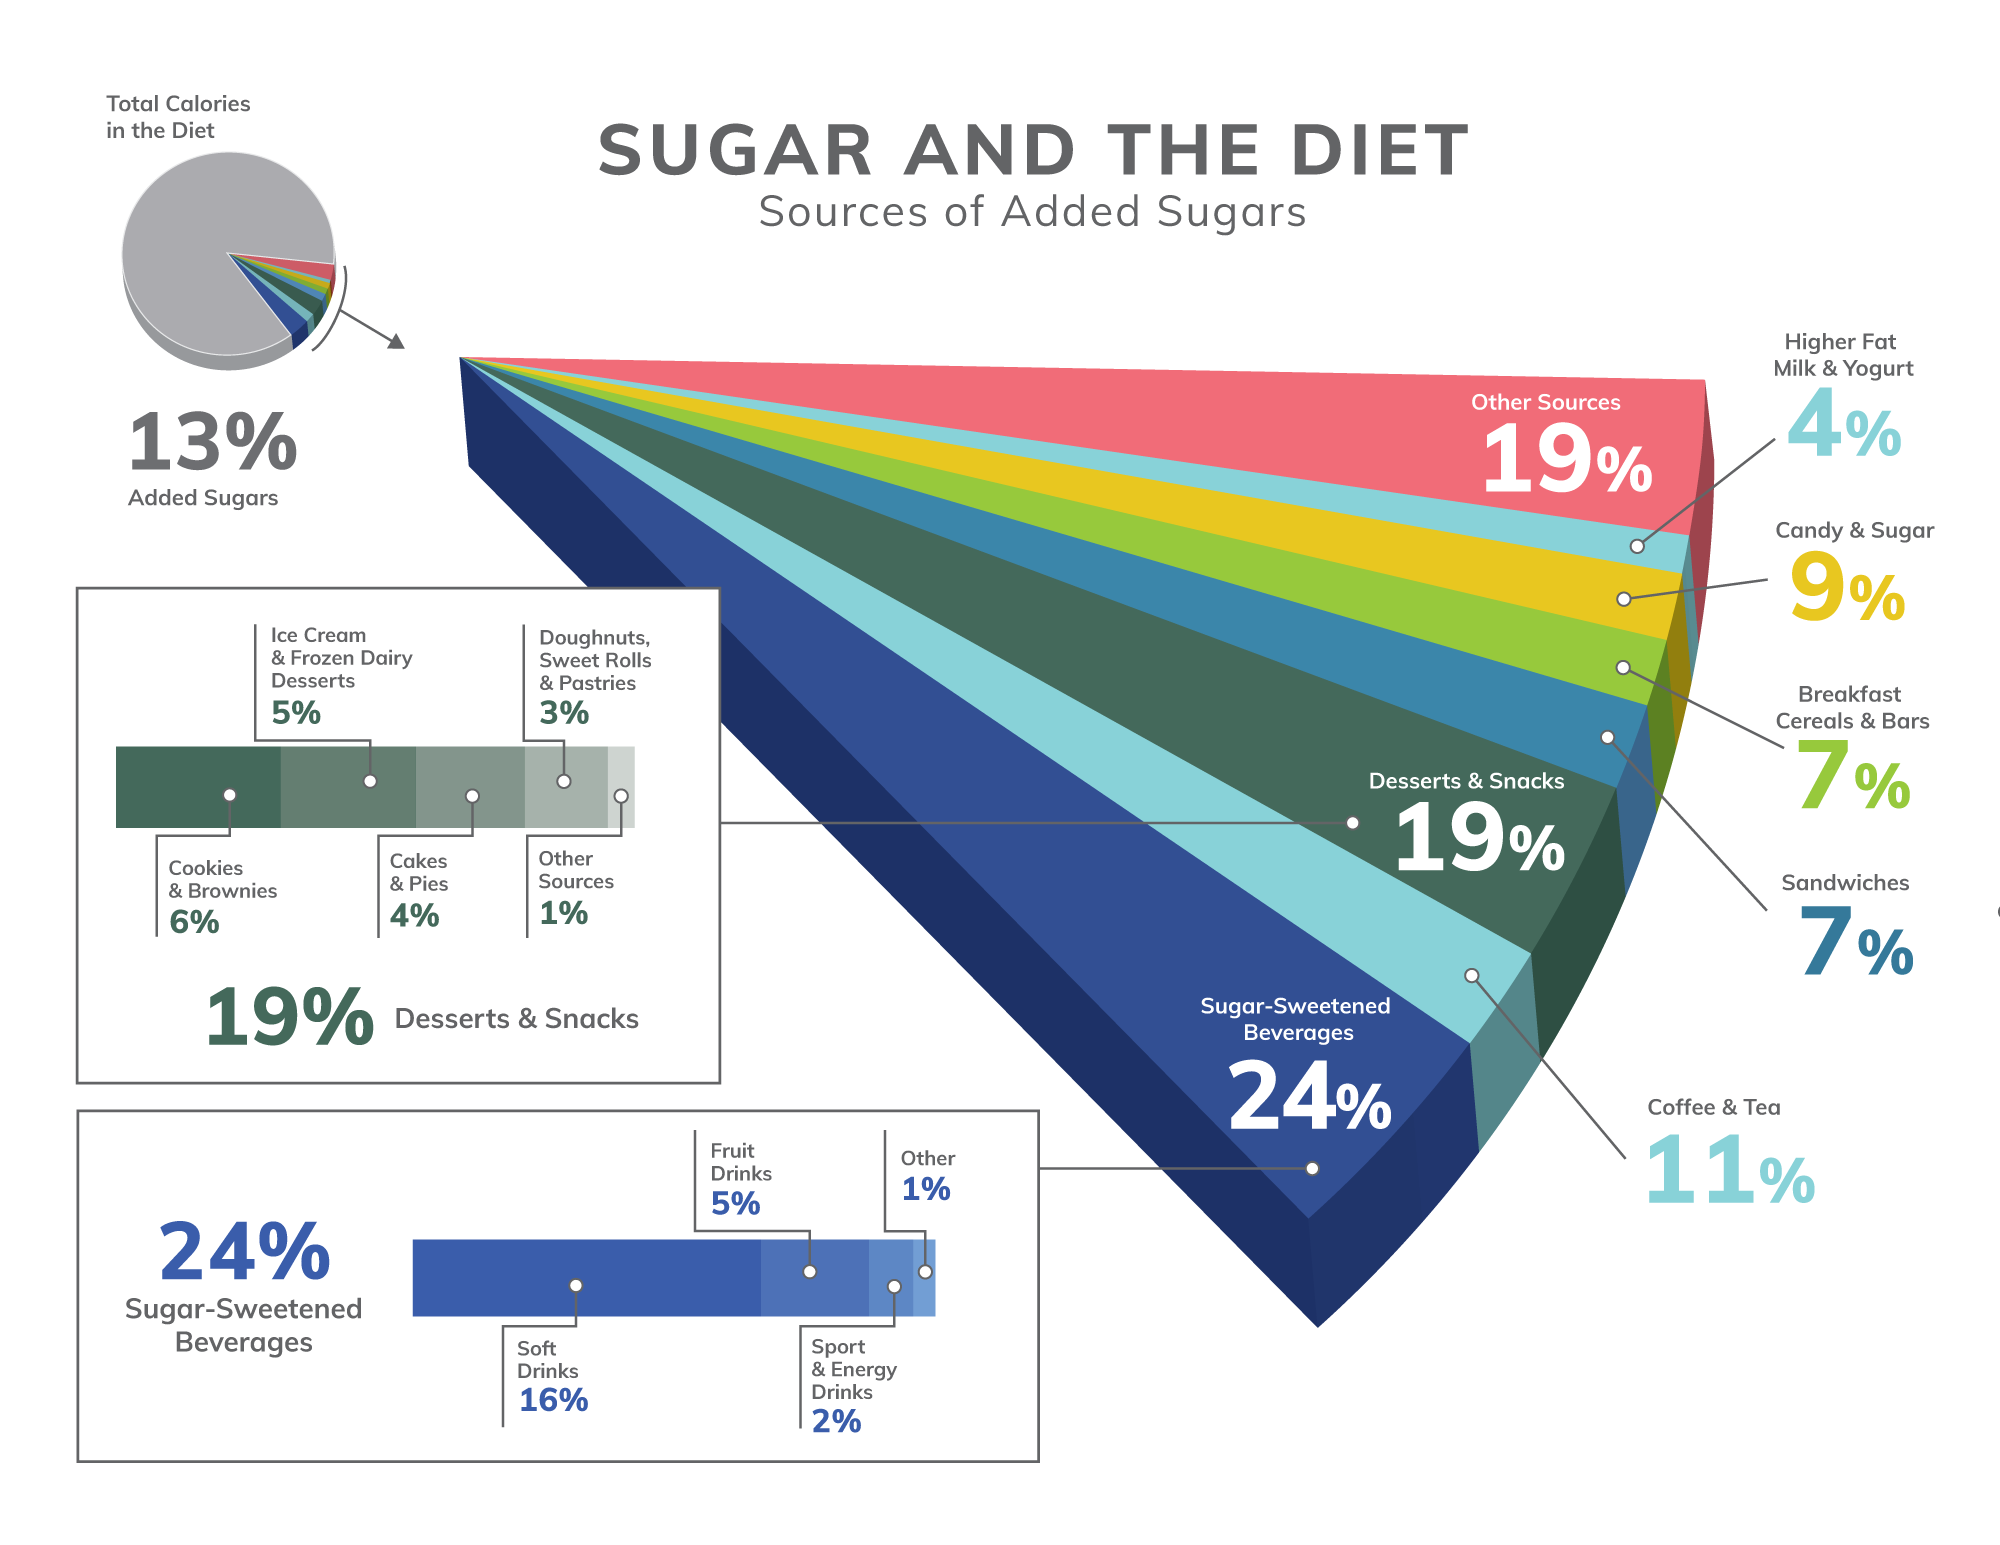 Sugar and the diet infographic